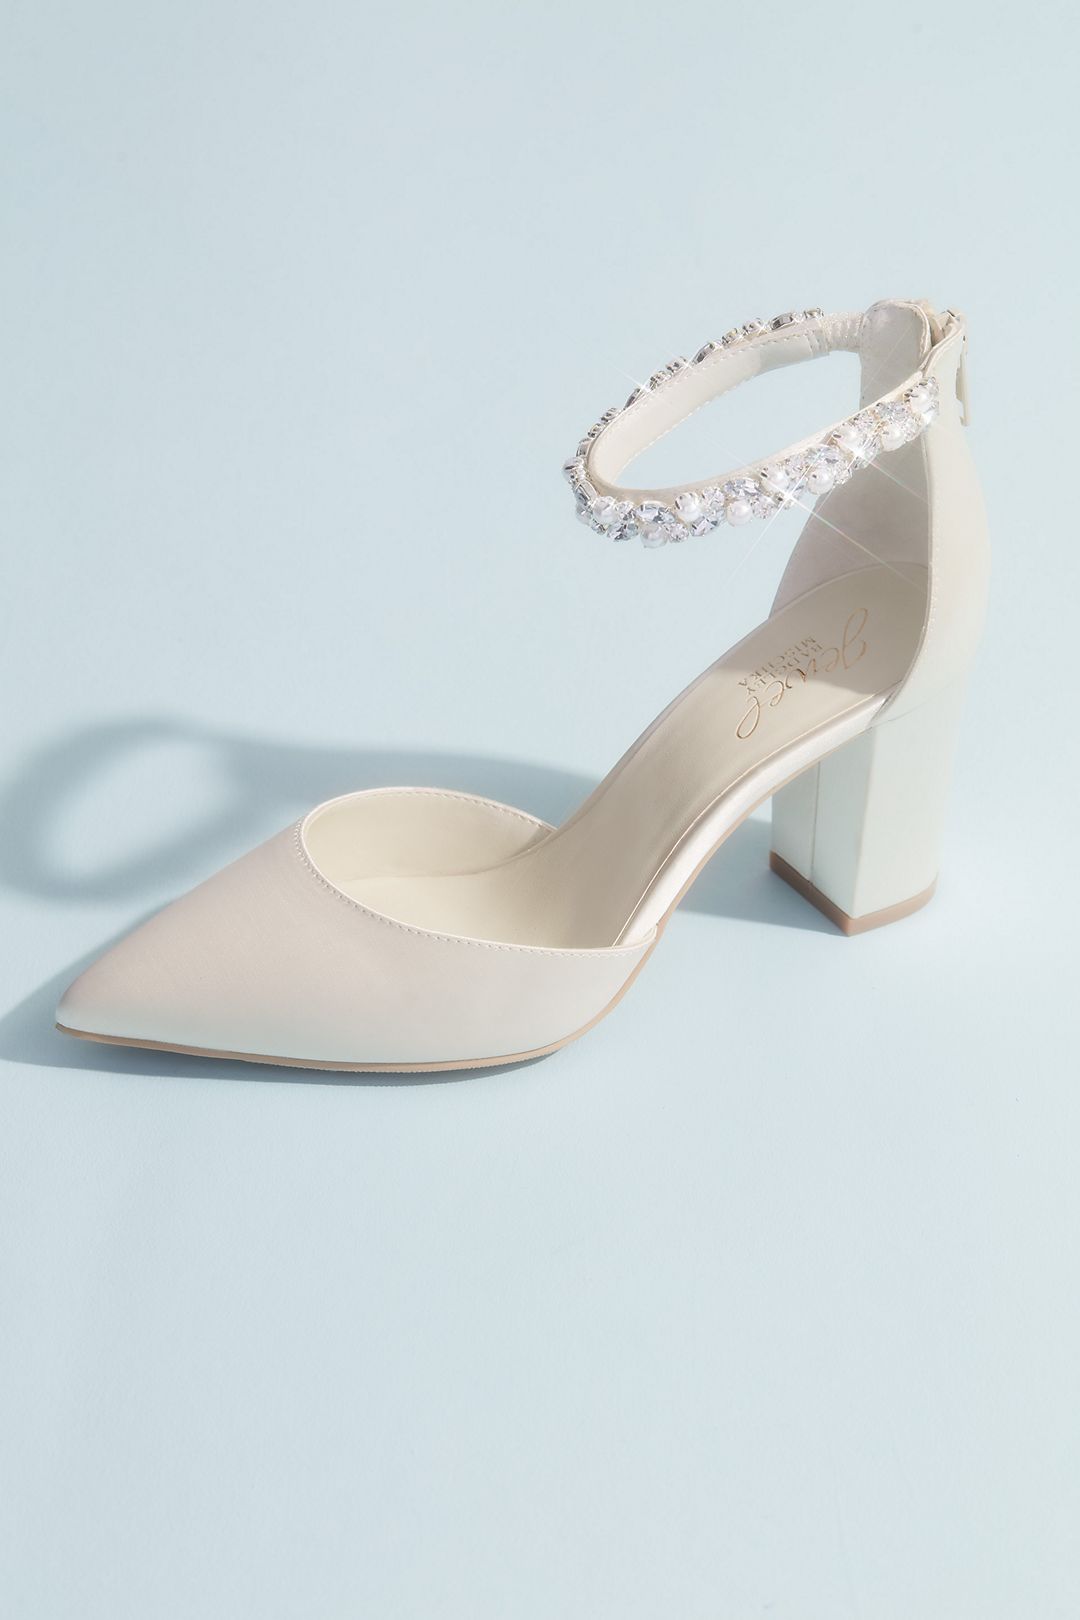 Statement Wedding Shoes For Every Bridal Style